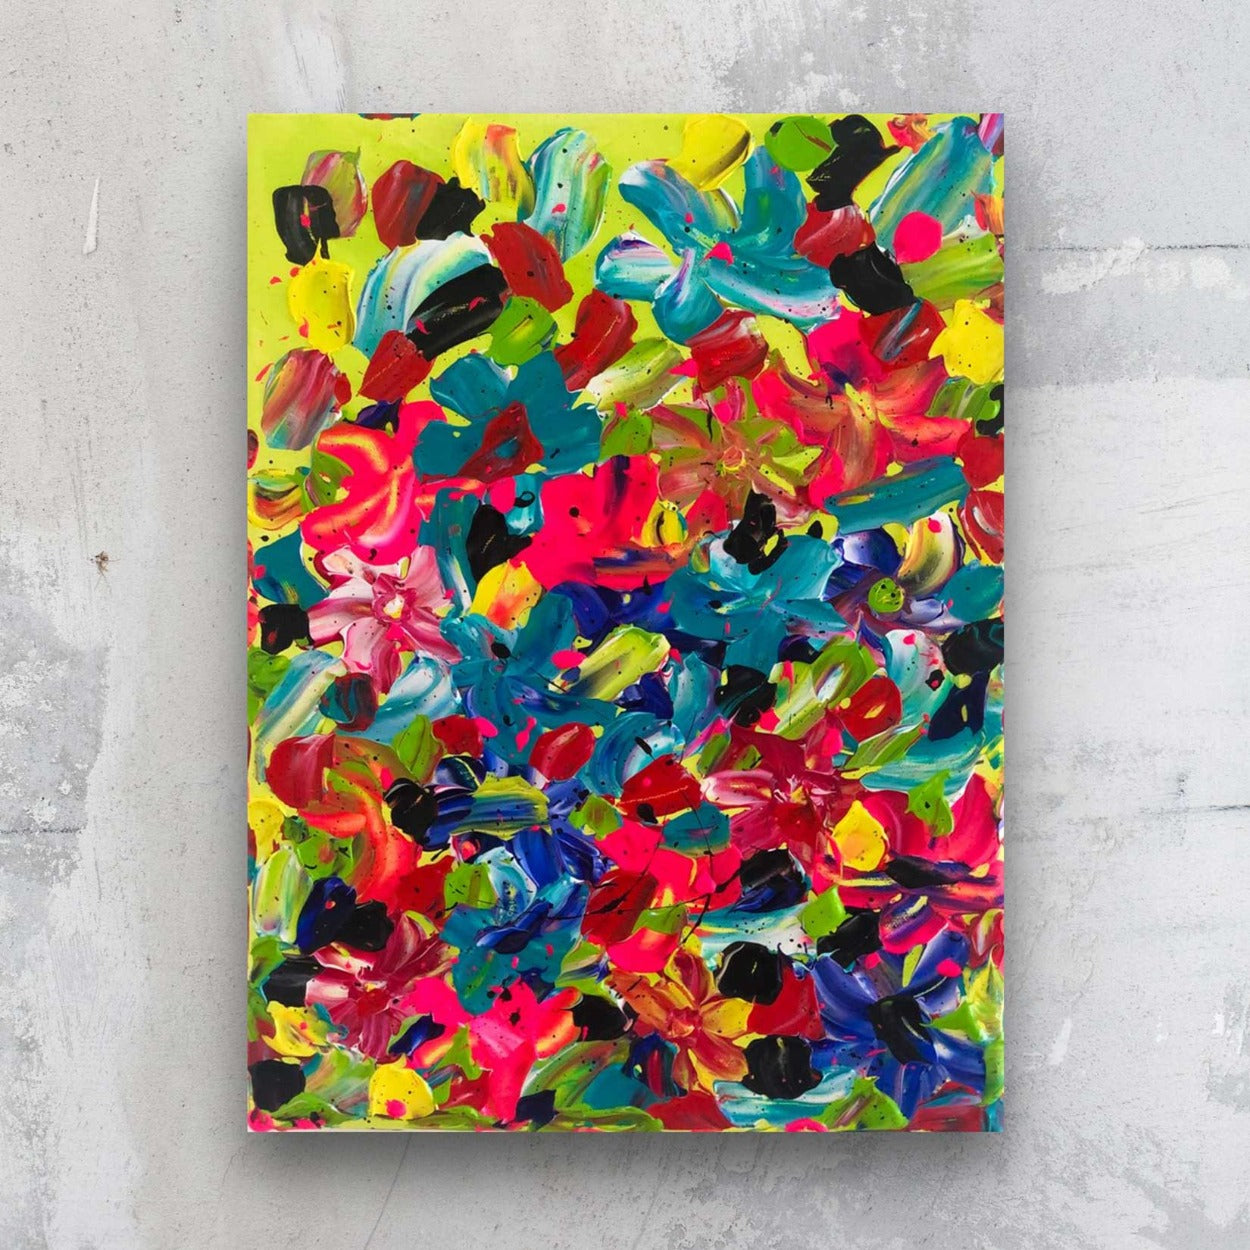 Summer Garden oriignal textured abstract painting on canvas in vibrant colours. Artwork created by Bridget Bradley, Abstract Artist